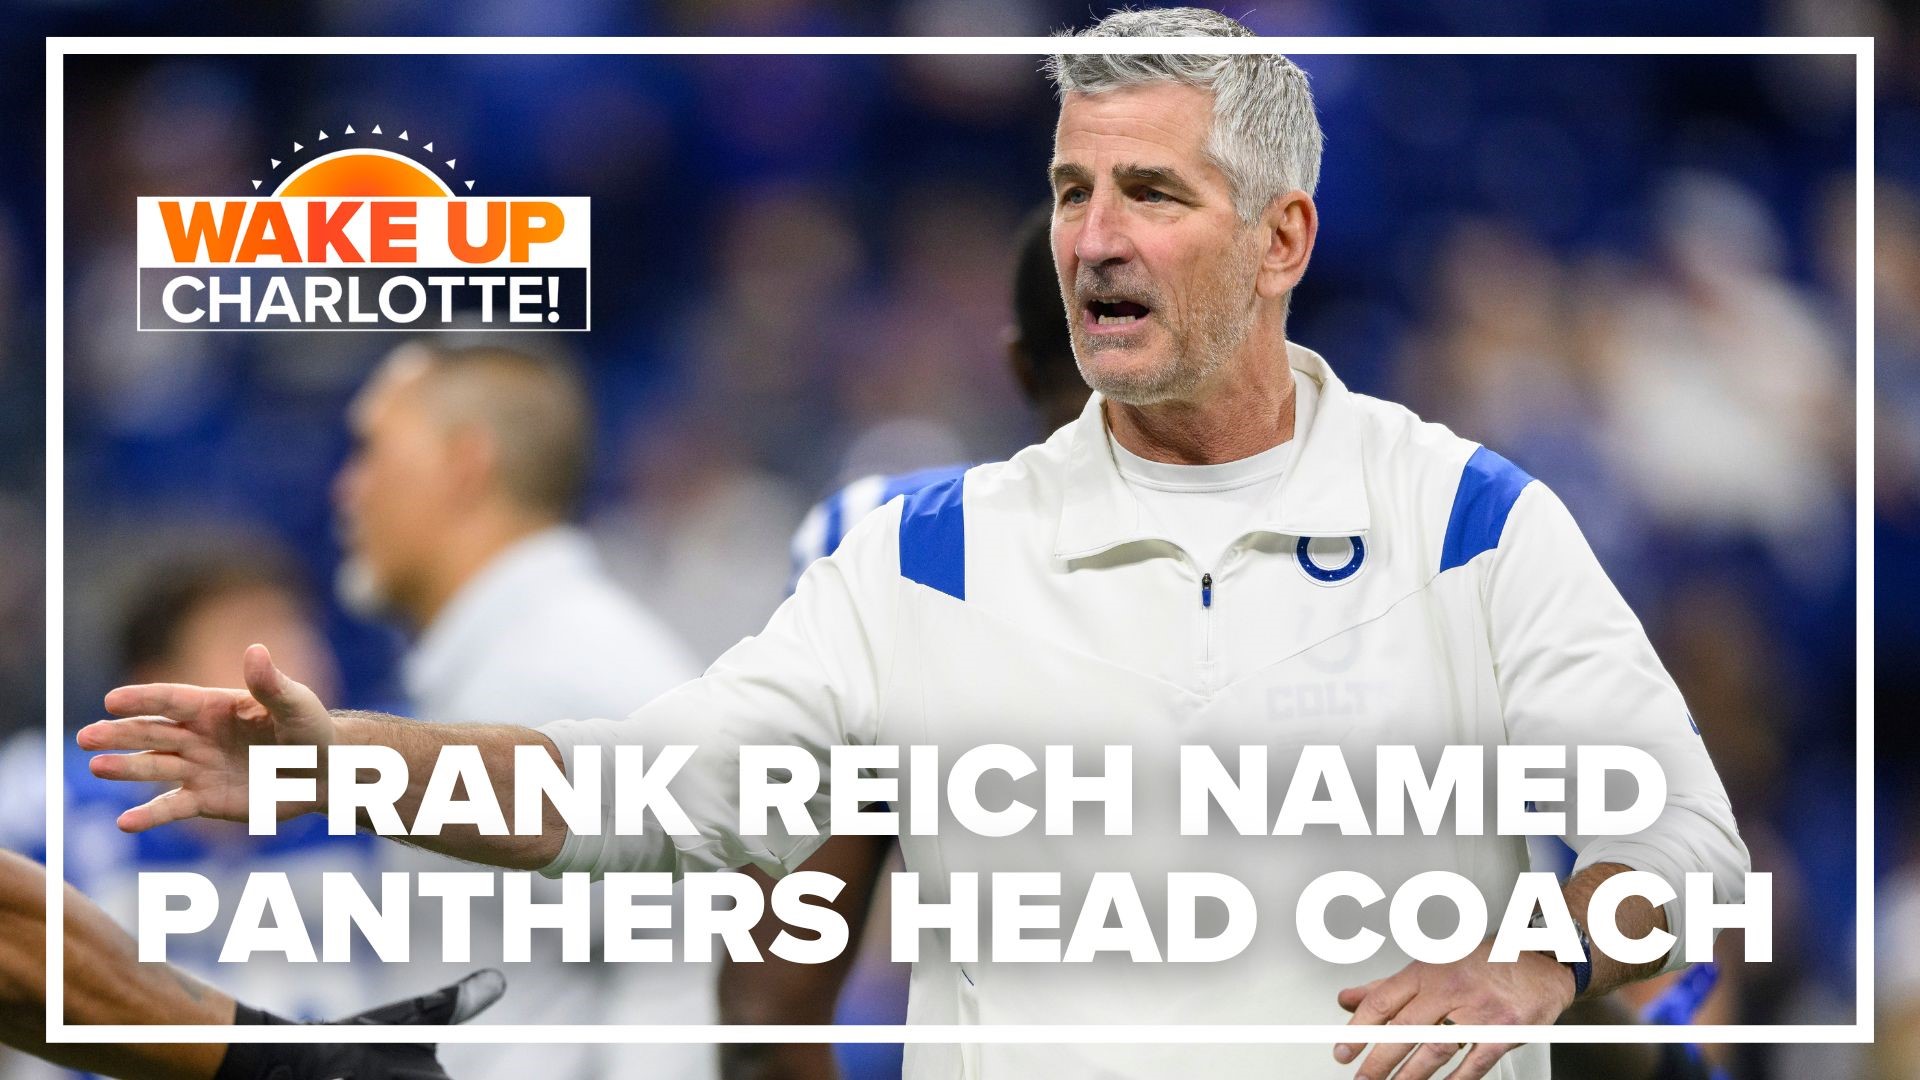 Frank Reich was announced as the new head coach of the Carolina Panthers, leaving fans divided over the decision to not hire Steve Wilks.